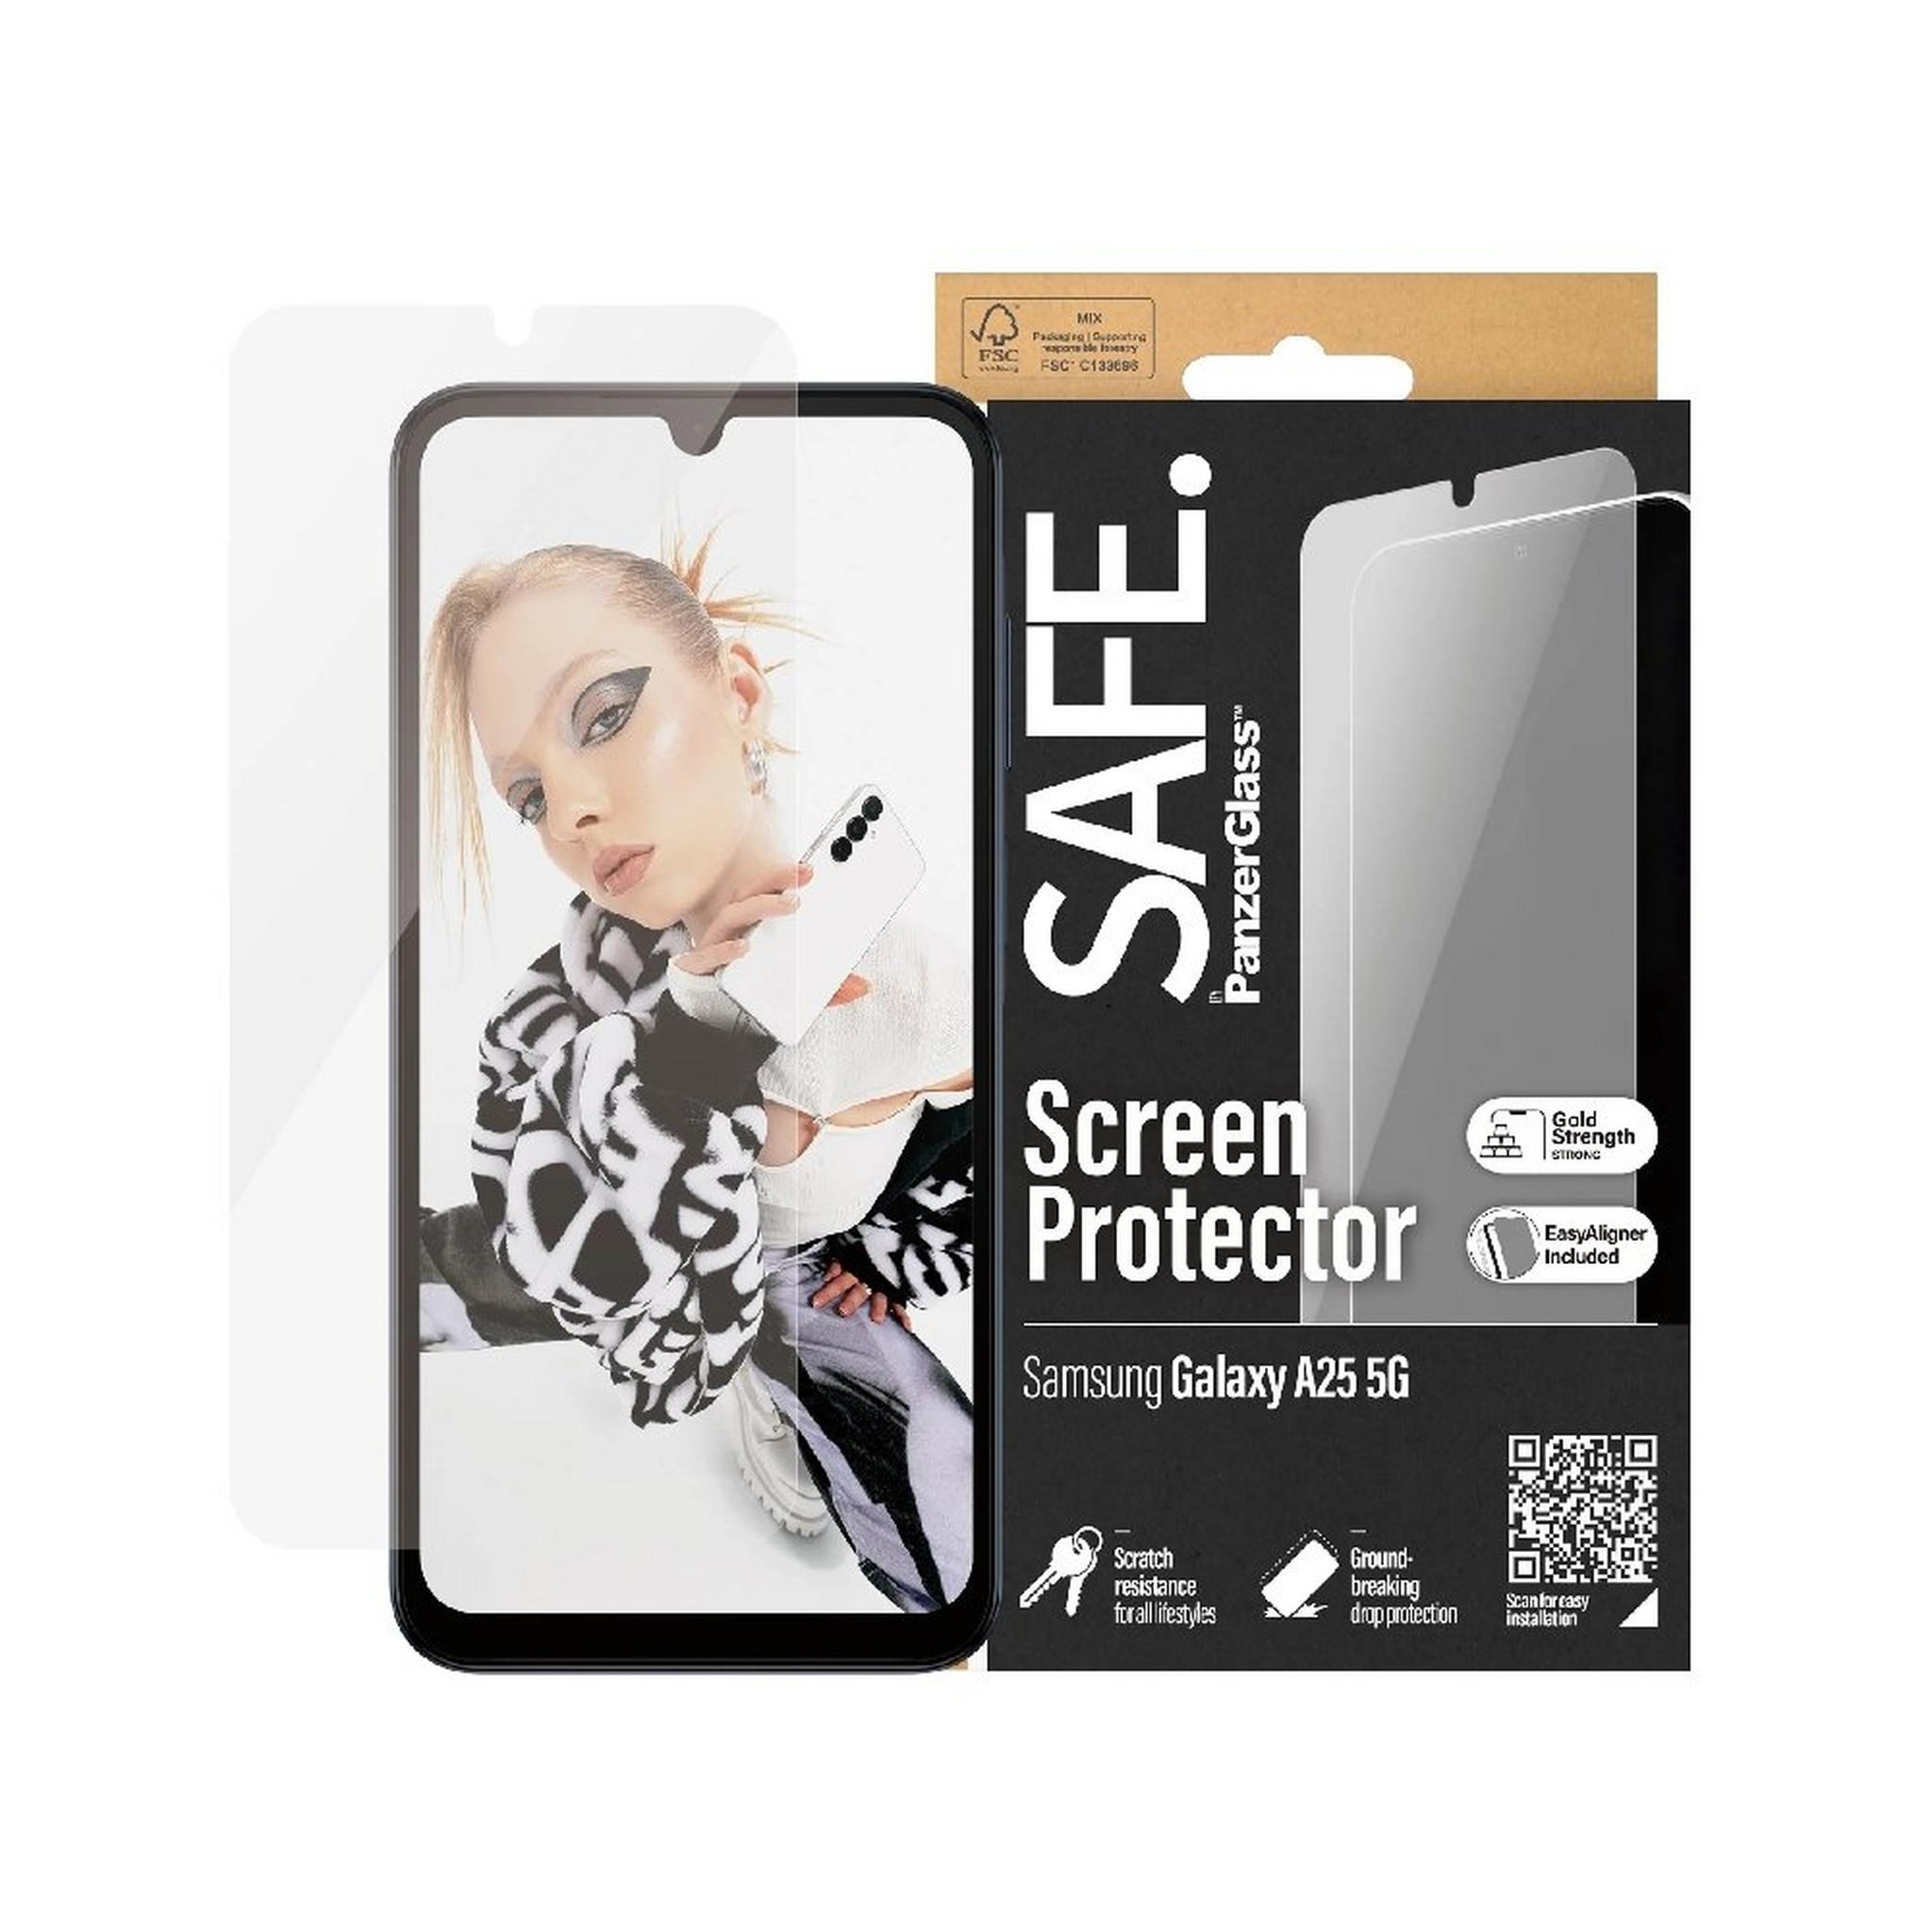 Panzer Safe Screen Protector for Samsung Galaxy A25, SAFE95680 – Clear